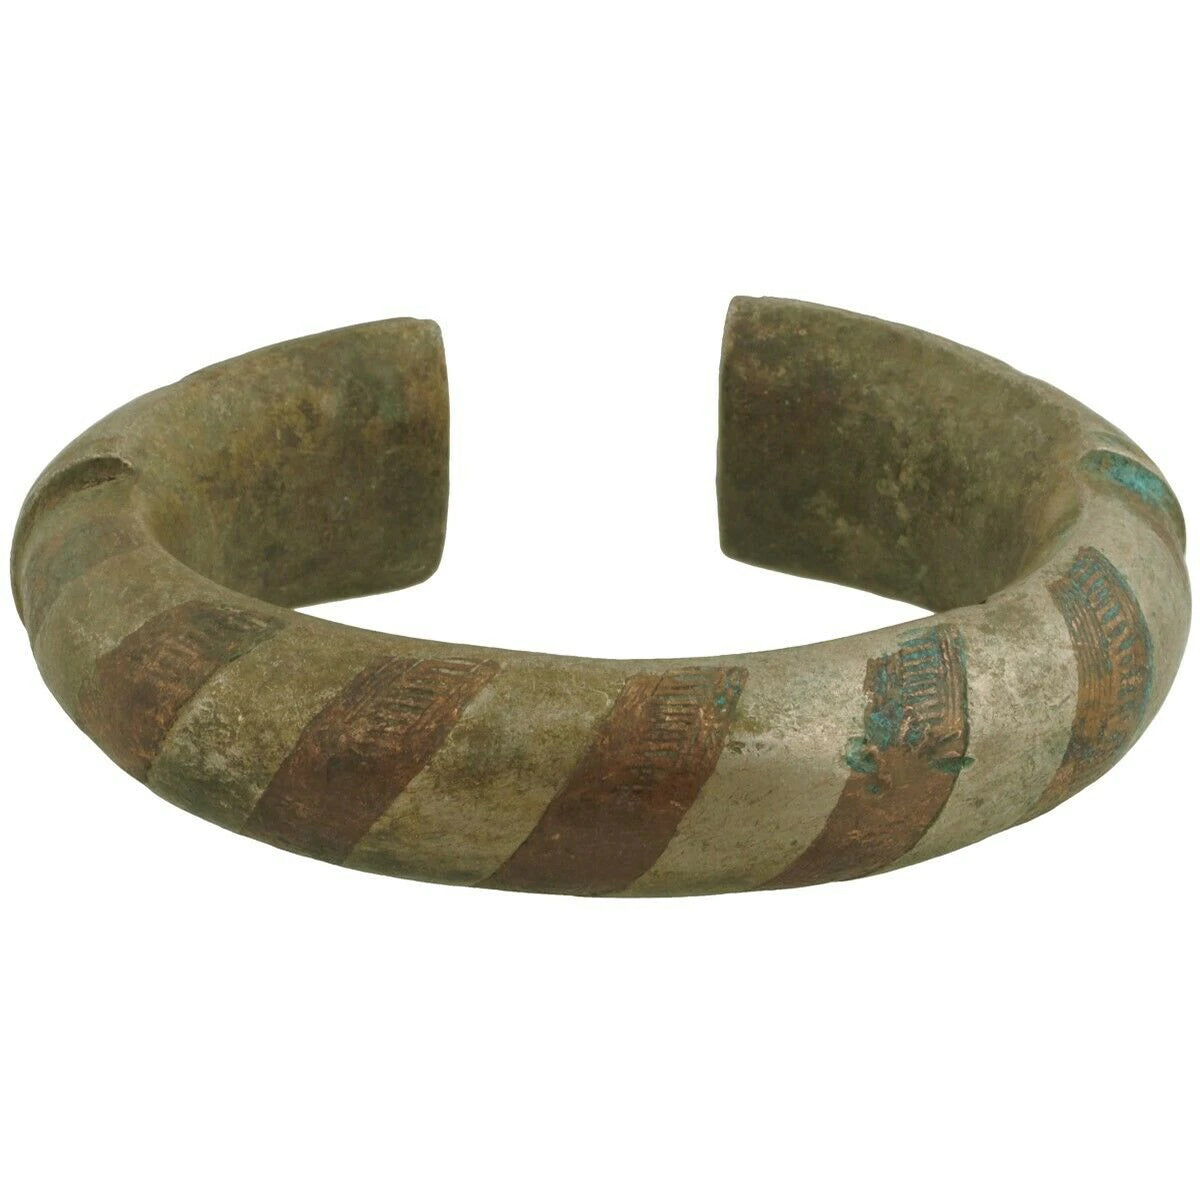 Old brass copper bracelet currency Ghana / Fulani African Ethnic Jewelry - Tribalgh